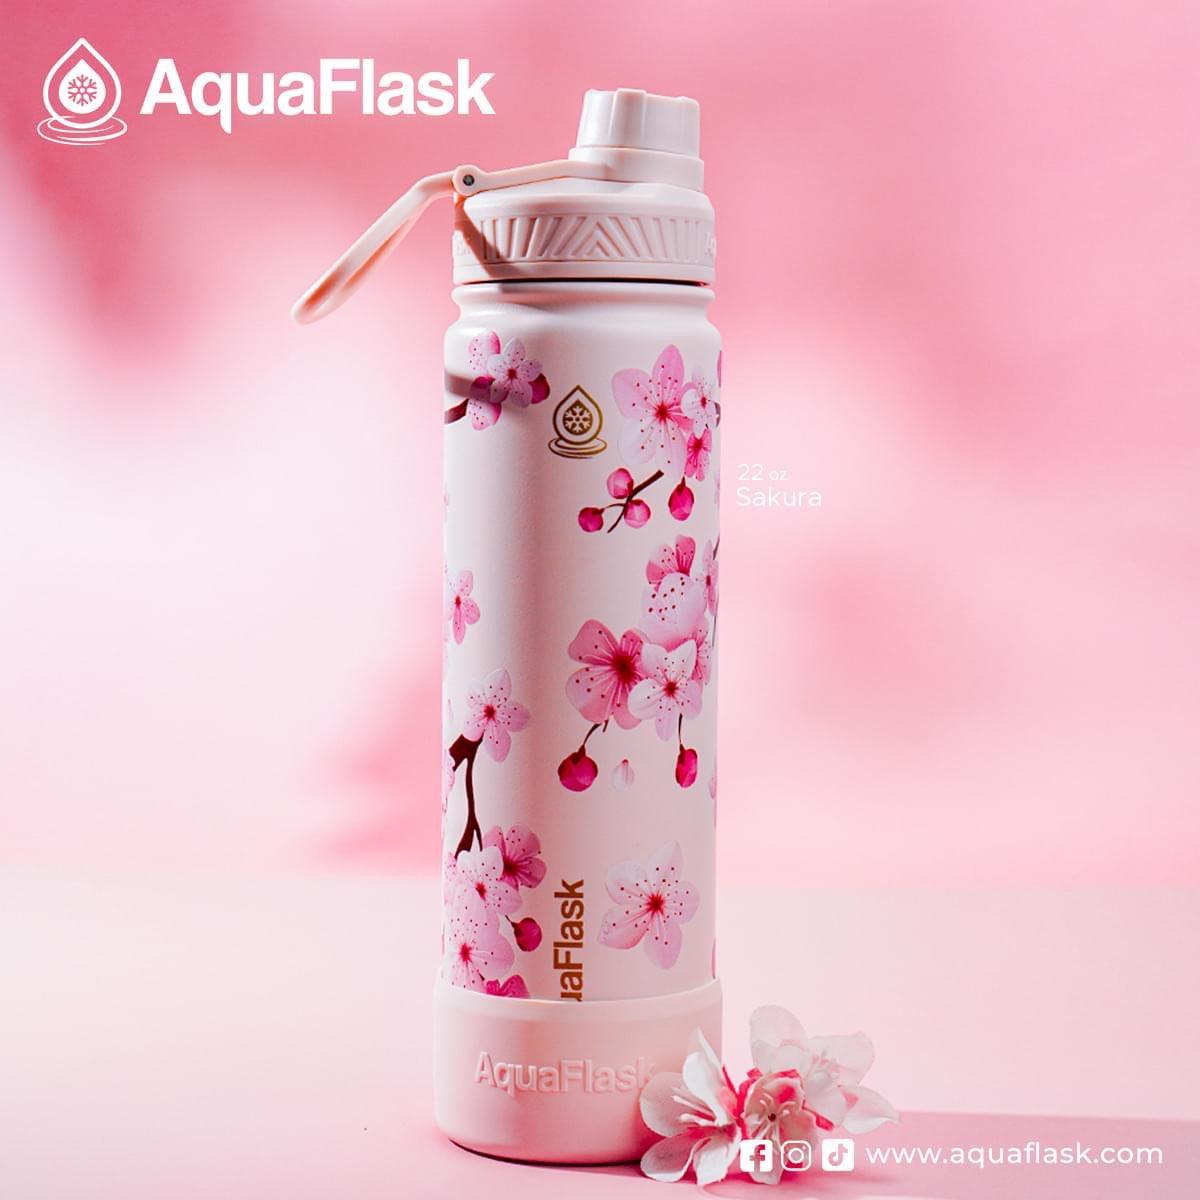 AquaFlask 22oz Sakura Wide Mouth with Spout Lid Vacuum Insulated Stainless Steel Drinking Water - Astrid & Rose